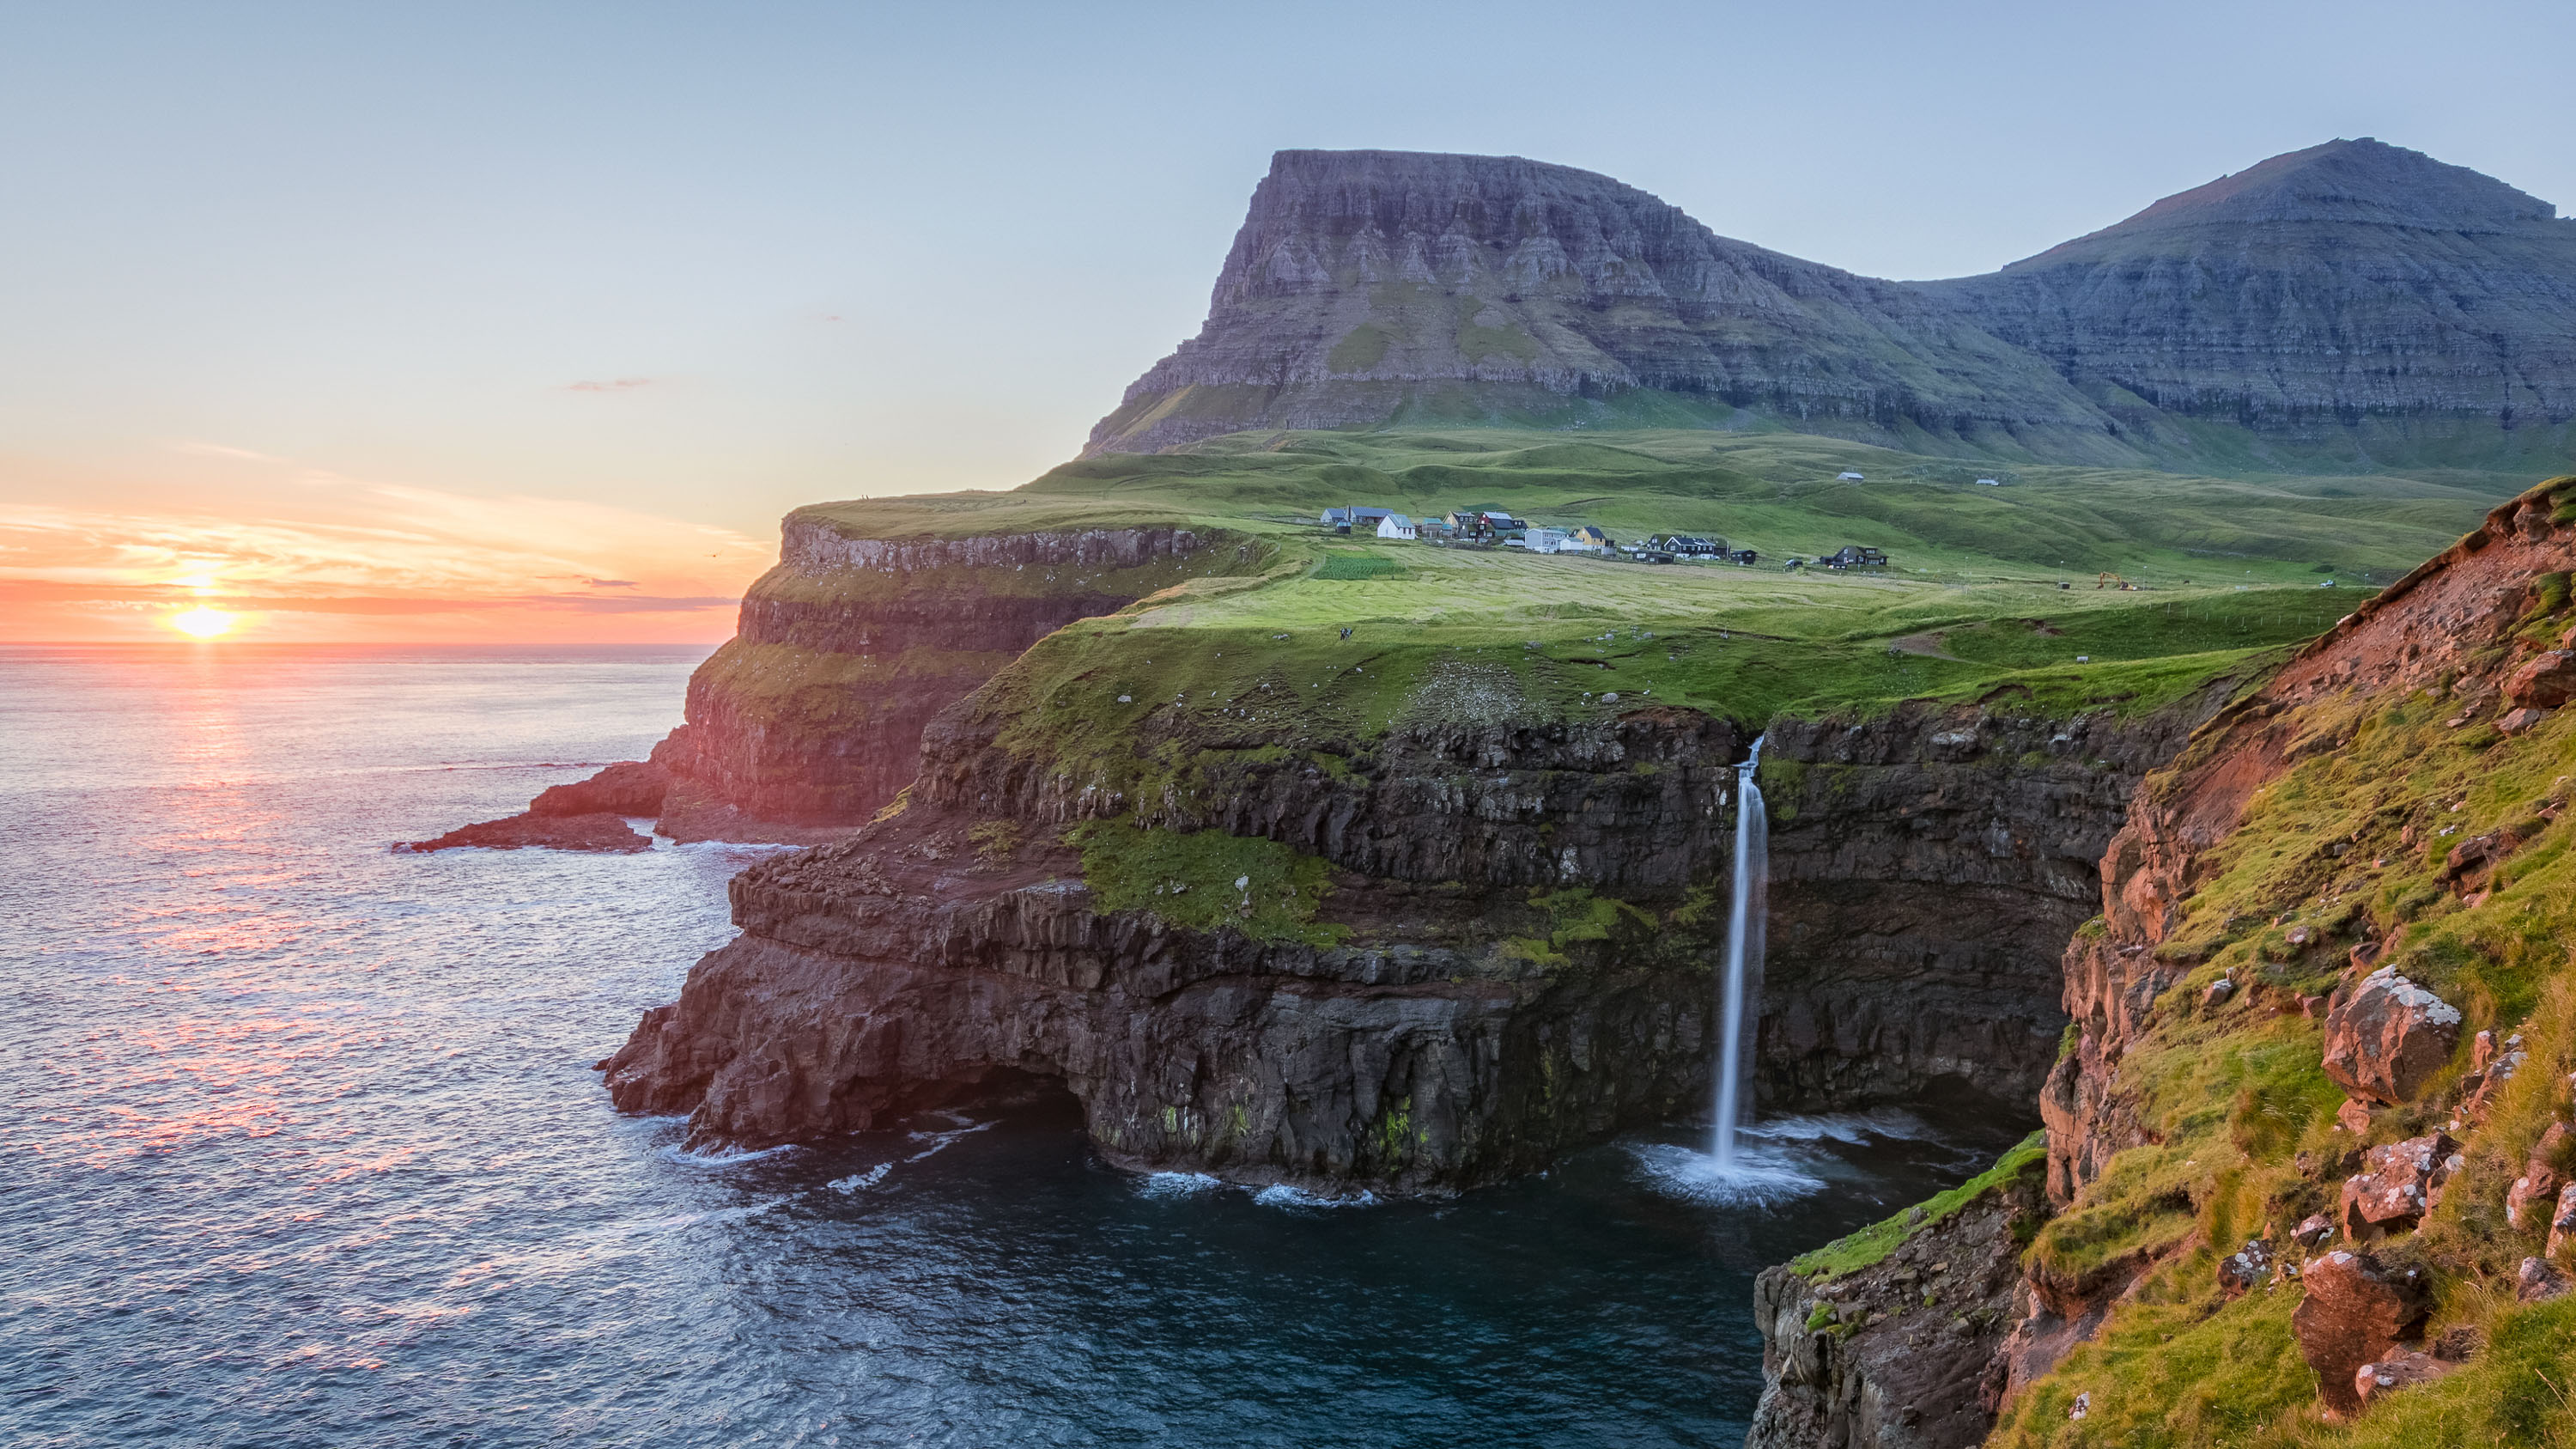 <p><strong>Estimated cost:</strong> $2,318</p> <p>You can see one of the world's most beautiful waterfalls at this secluded destination. Set atop a grassy seaside cliff with a tumbling waterfall pouring into the ocean is the tiny village of Gásadalur. Rugged mountains surround it on three sides, the sea on the fourth.</p> <p><strong><em>Related: <a href="https://www.gobankingrates.com/saving-money/travel/best-us-locations-to-travel-2k-budget/?utm_term=related_link_3&utm_campaign=1224529&utm_source=msn.com&utm_content=5&utm_medium=rss" rel="">5 Best US Locations To Travel To on a $2,000 Budget</a><br>More: <a href="https://www.gobankingrates.com/saving-money/travel/all-inclusive-resort-hacks-to-help-you-save-big/?utm_term=related_link_4&utm_campaign=1224529&utm_source=msn.com&utm_content=6&utm_medium=rss" rel="">10 All-Inclusive Resort Hacks That Can Help You Save Big</a></em></strong></p> <p>The village tucks away on the far western edge of the Faroe Islands, centered in the ocean between Iceland, Scotland and Norway. Transport yourself to simpler times of snug homes with grass-thatched roofs, visit its famous waterfall or hike the path that was once its primary connection to the outside world.</p> <p><strong>How to get there:</strong> Although the village was cut off from the outside world prior to 2004, a hole blasted through a mountain now allows automobile access directly from the airport, which makes it no longer the most isolated place in the world.</p>